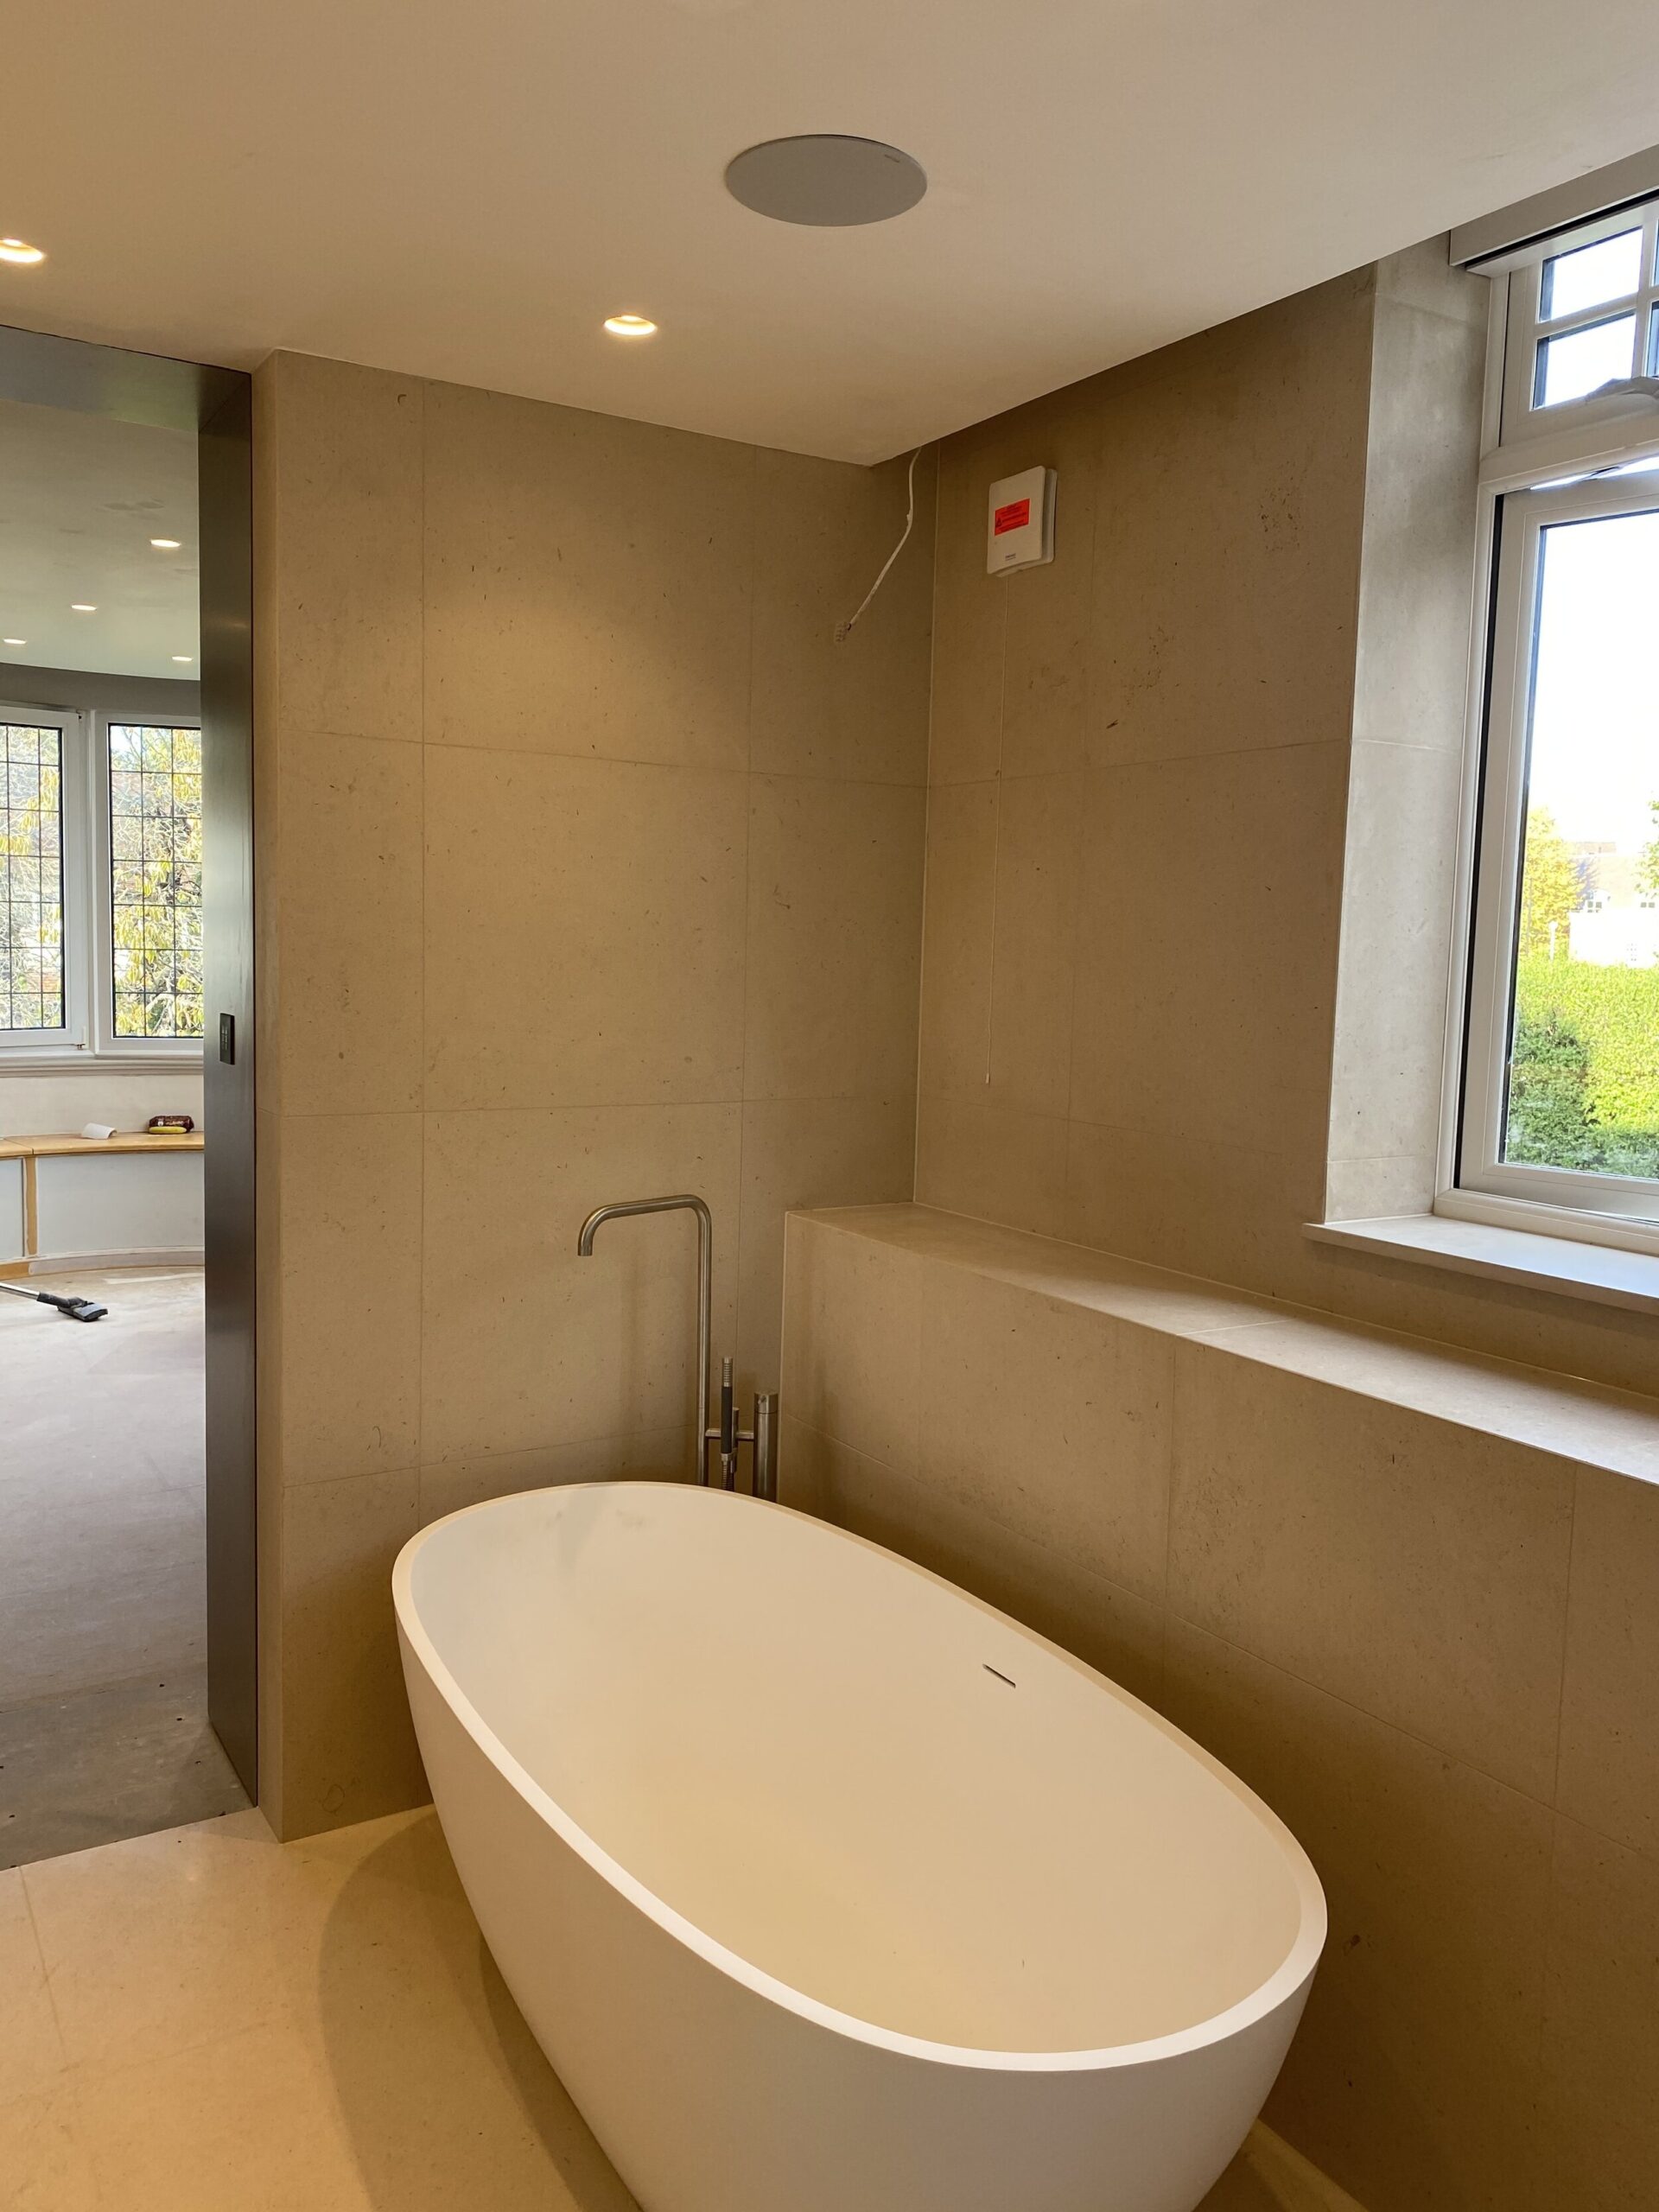 Bathroom design, in-ceiling speakers, smart home, home automation